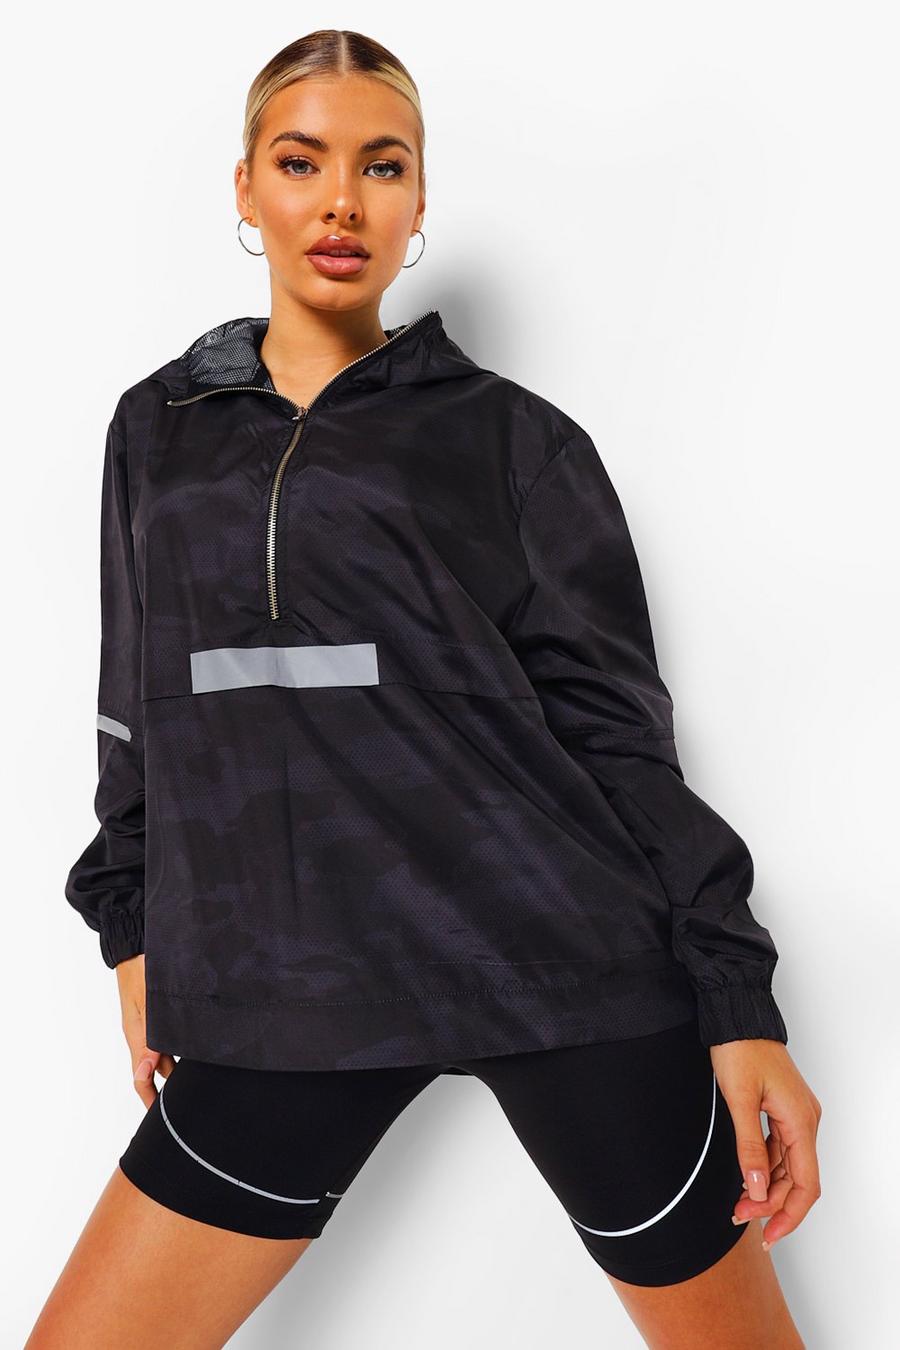 Black Camo Waterproof Running Jacket with Reflective image number 1